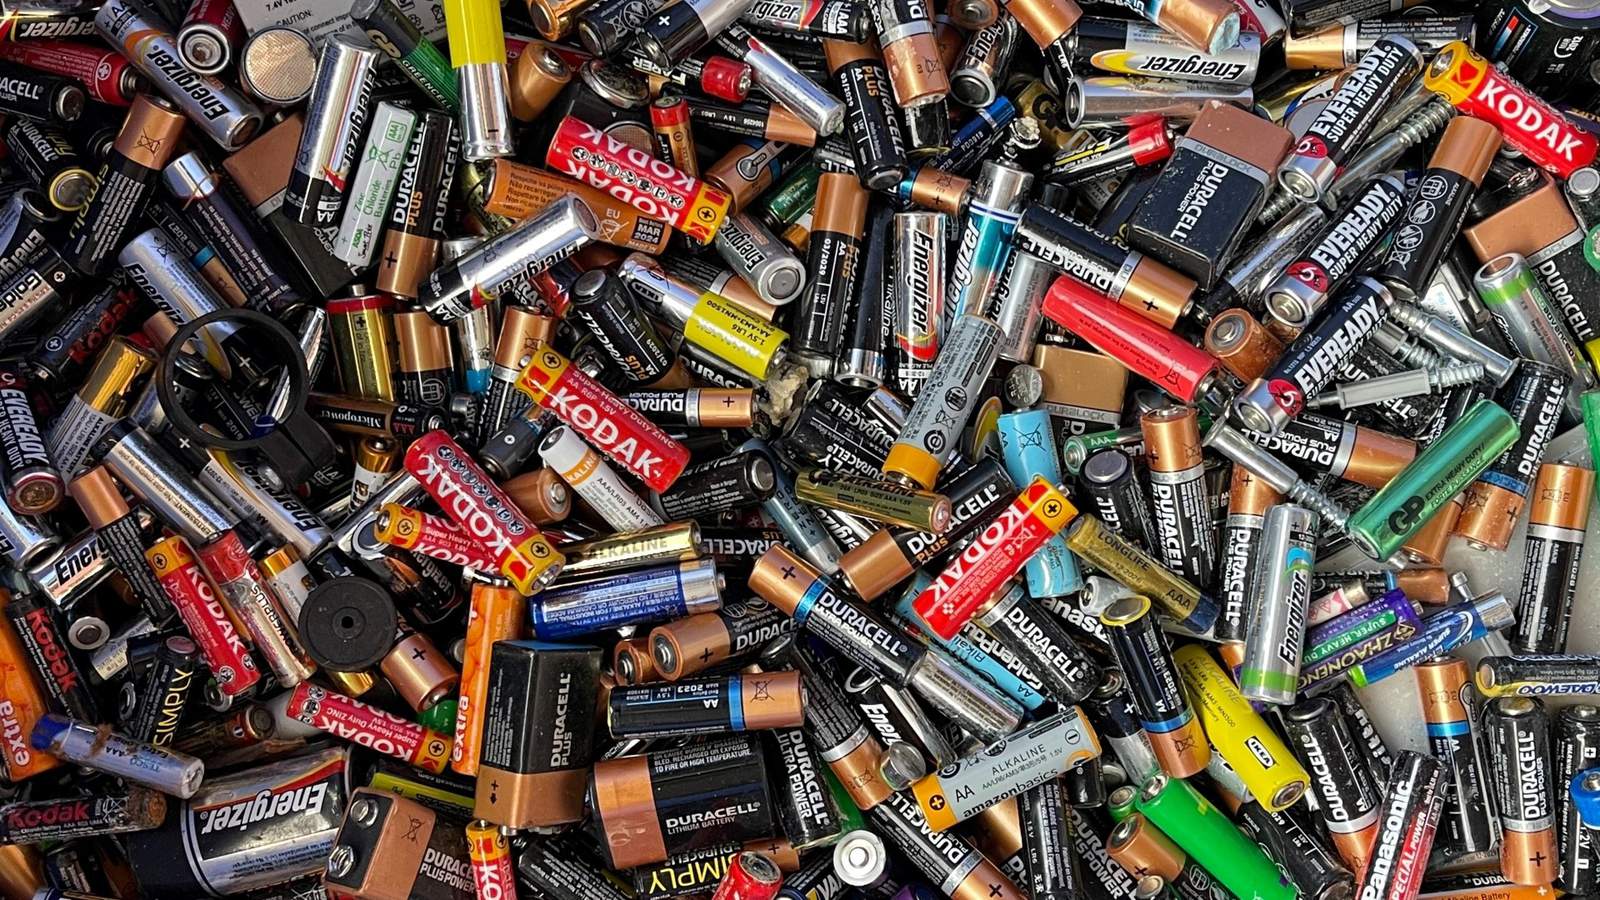 This is the best way to dispose of batteries